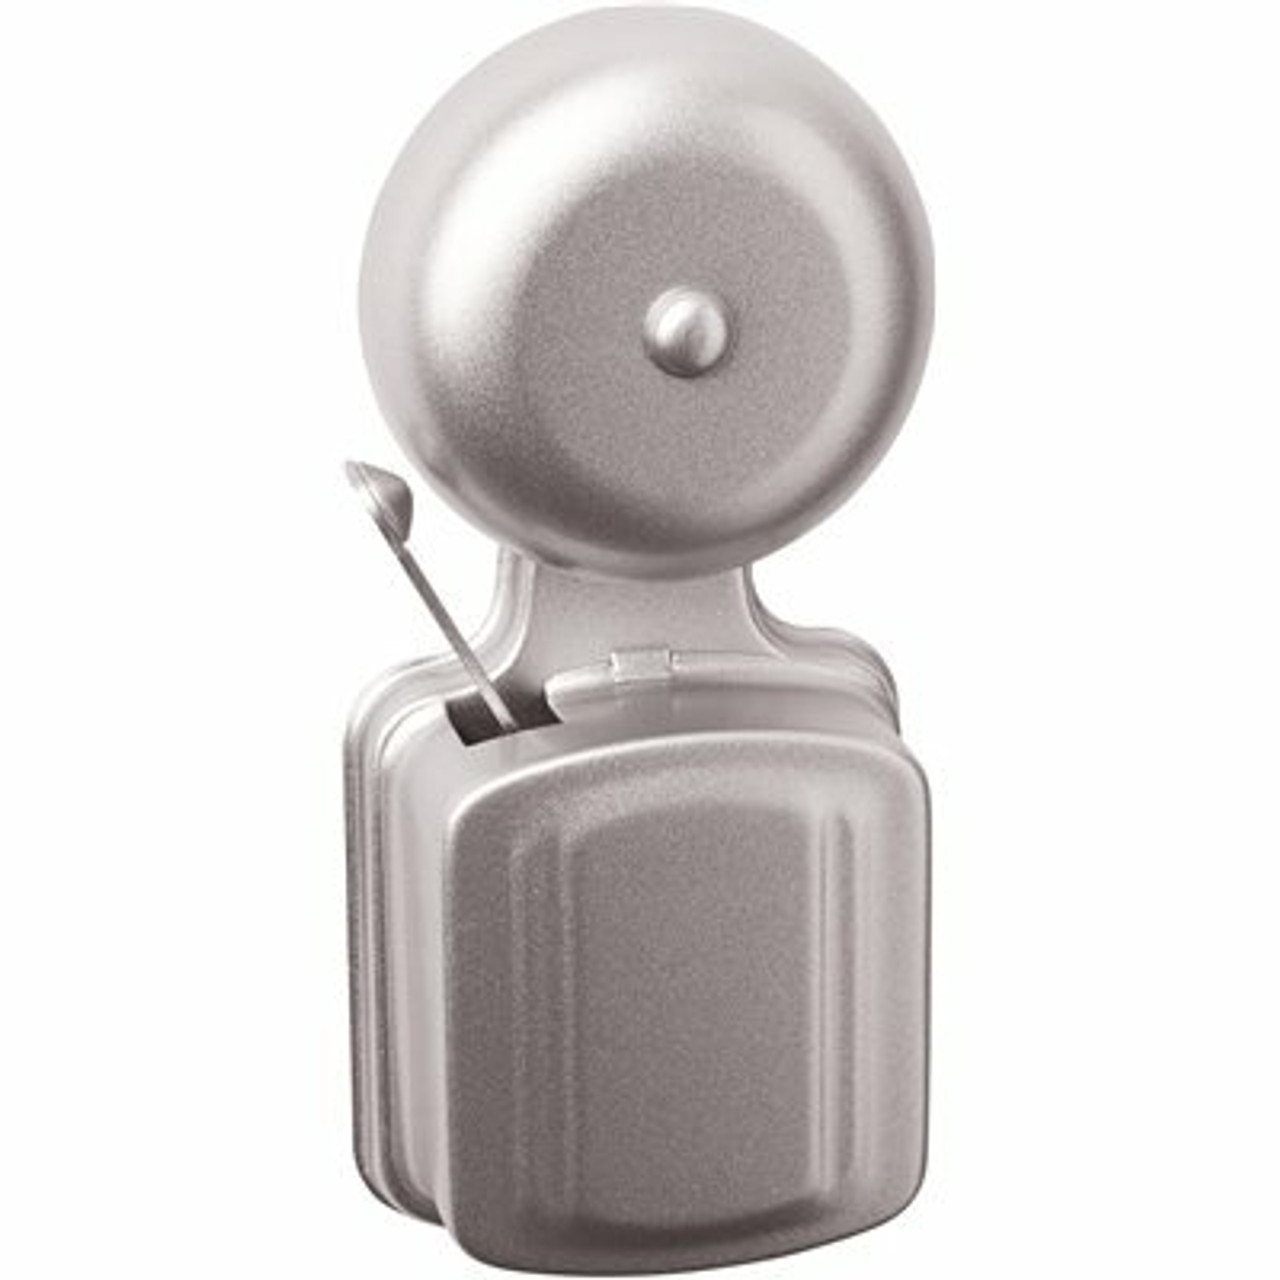 Newhouse Hardware All Purpose Wired Traditional Doorbell Chime